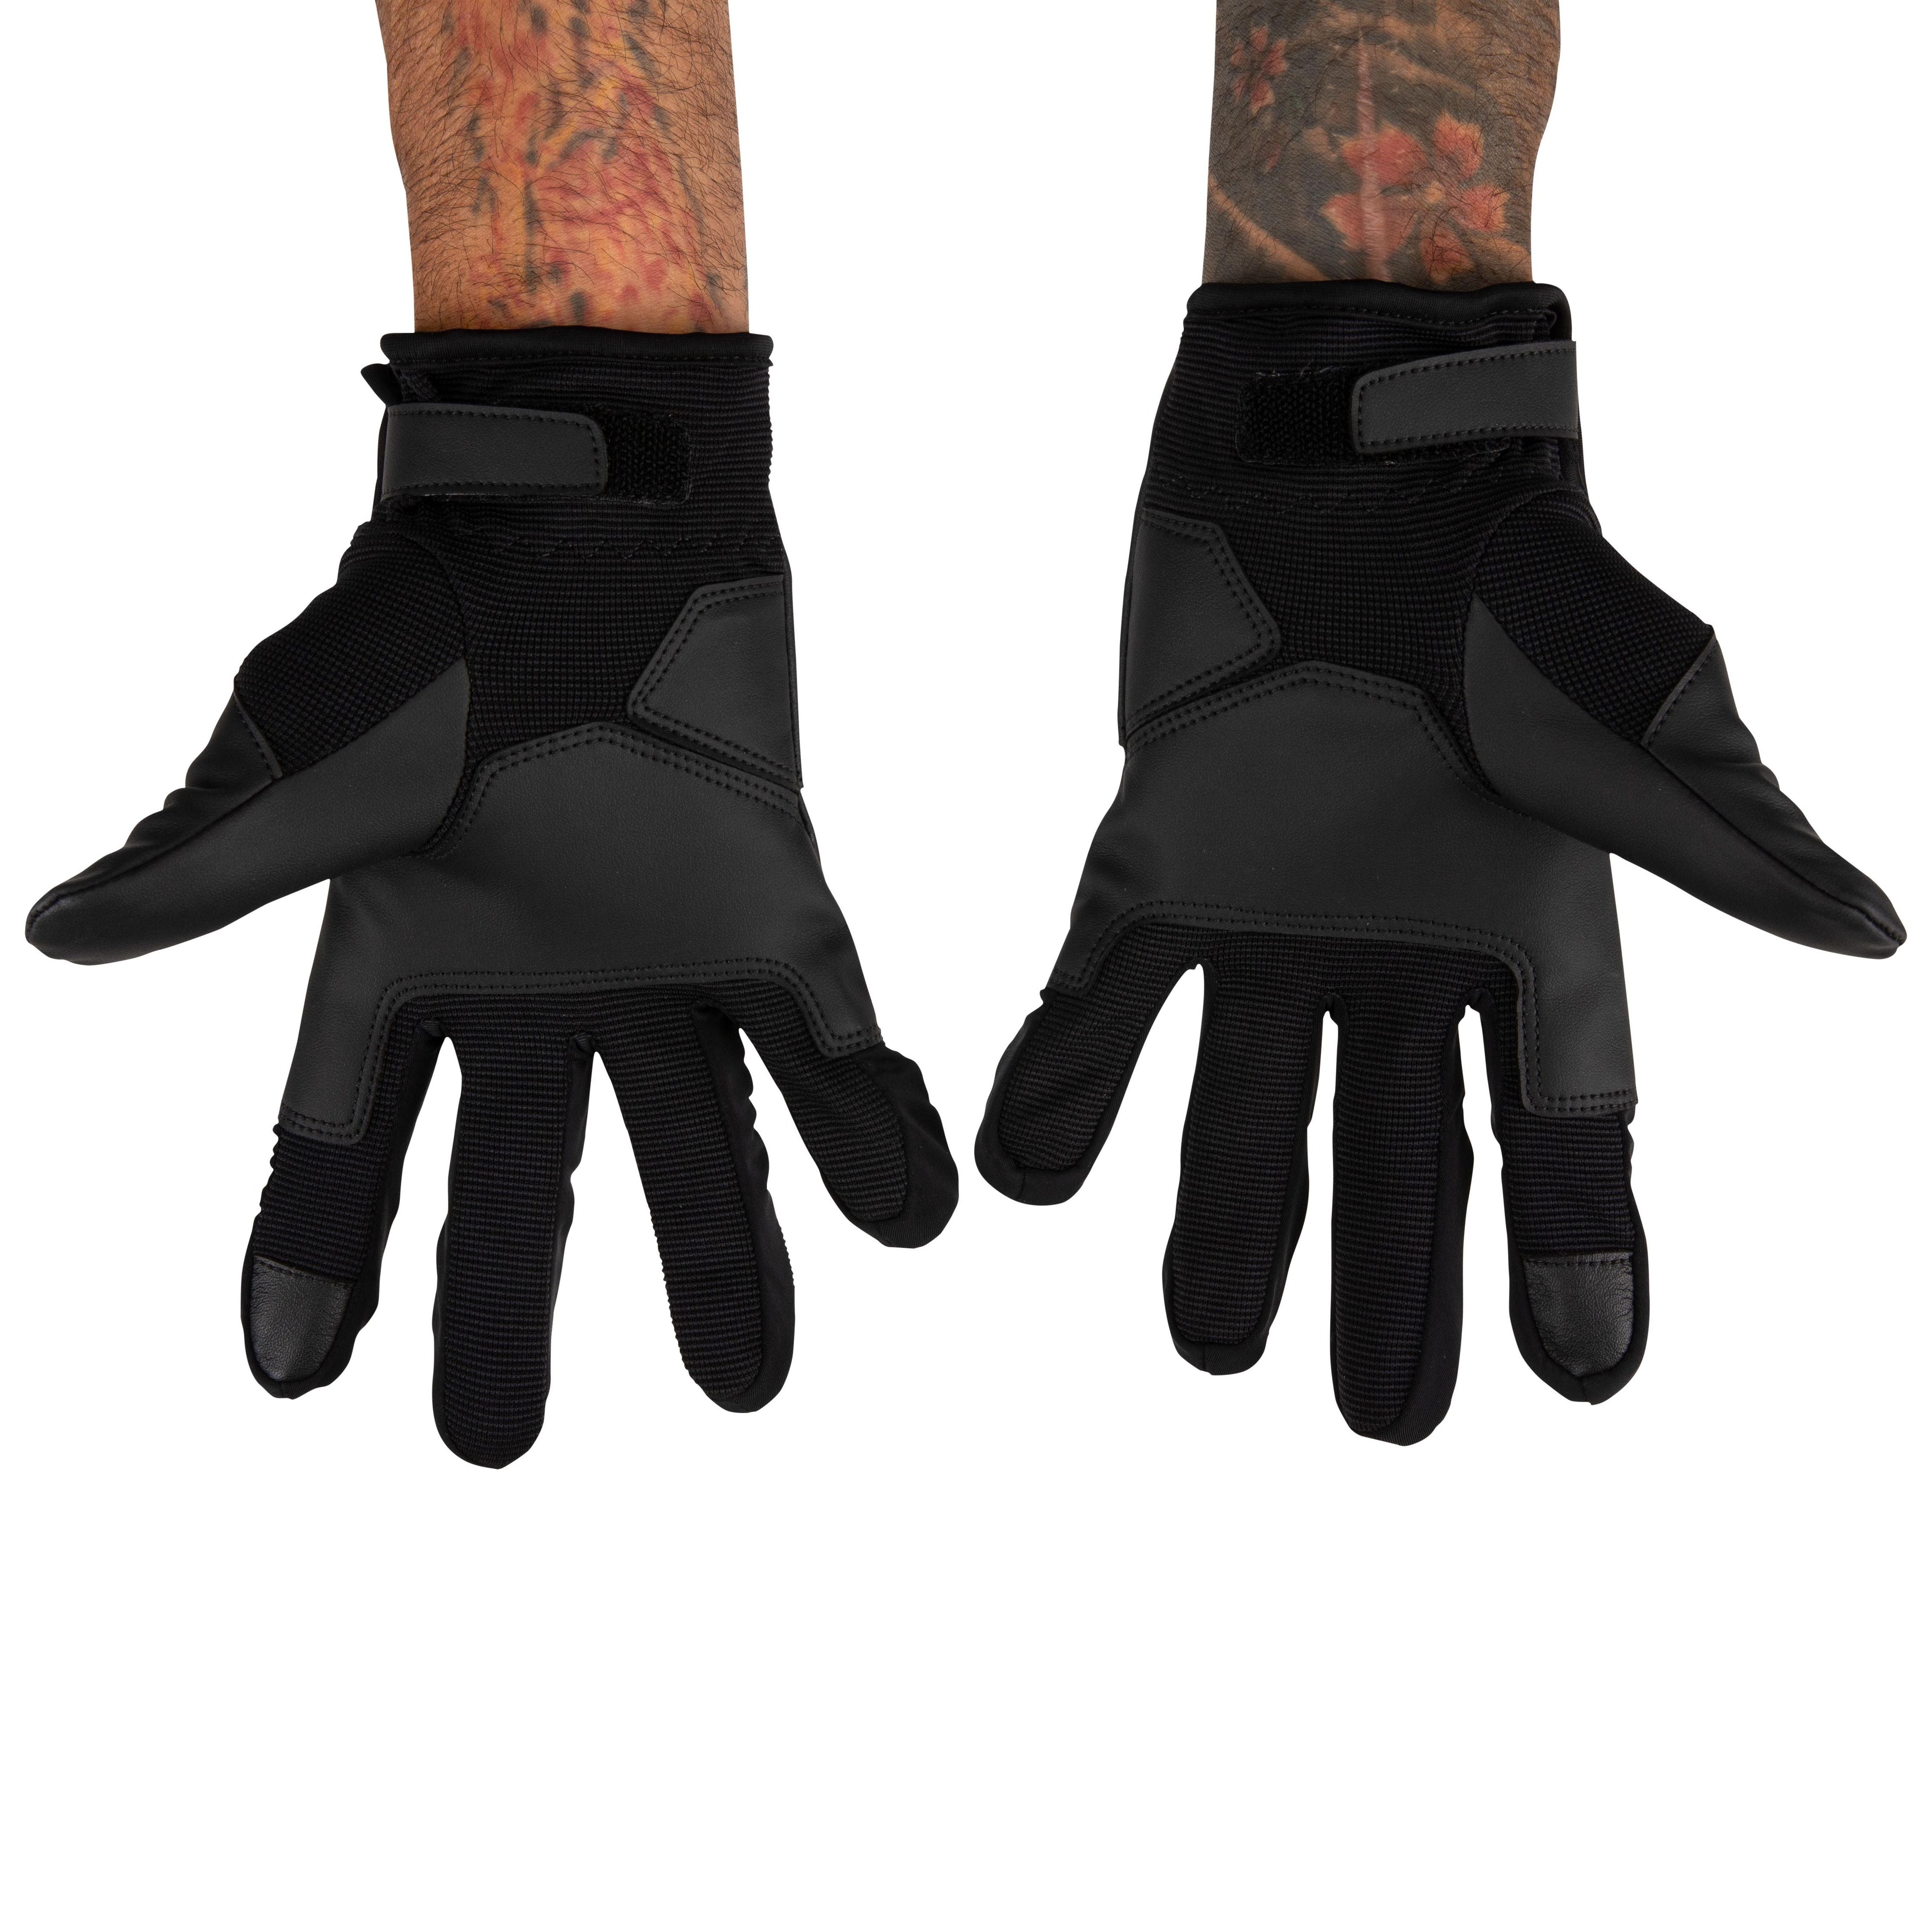 Simms Offshore Angler's Glove Black Image 02